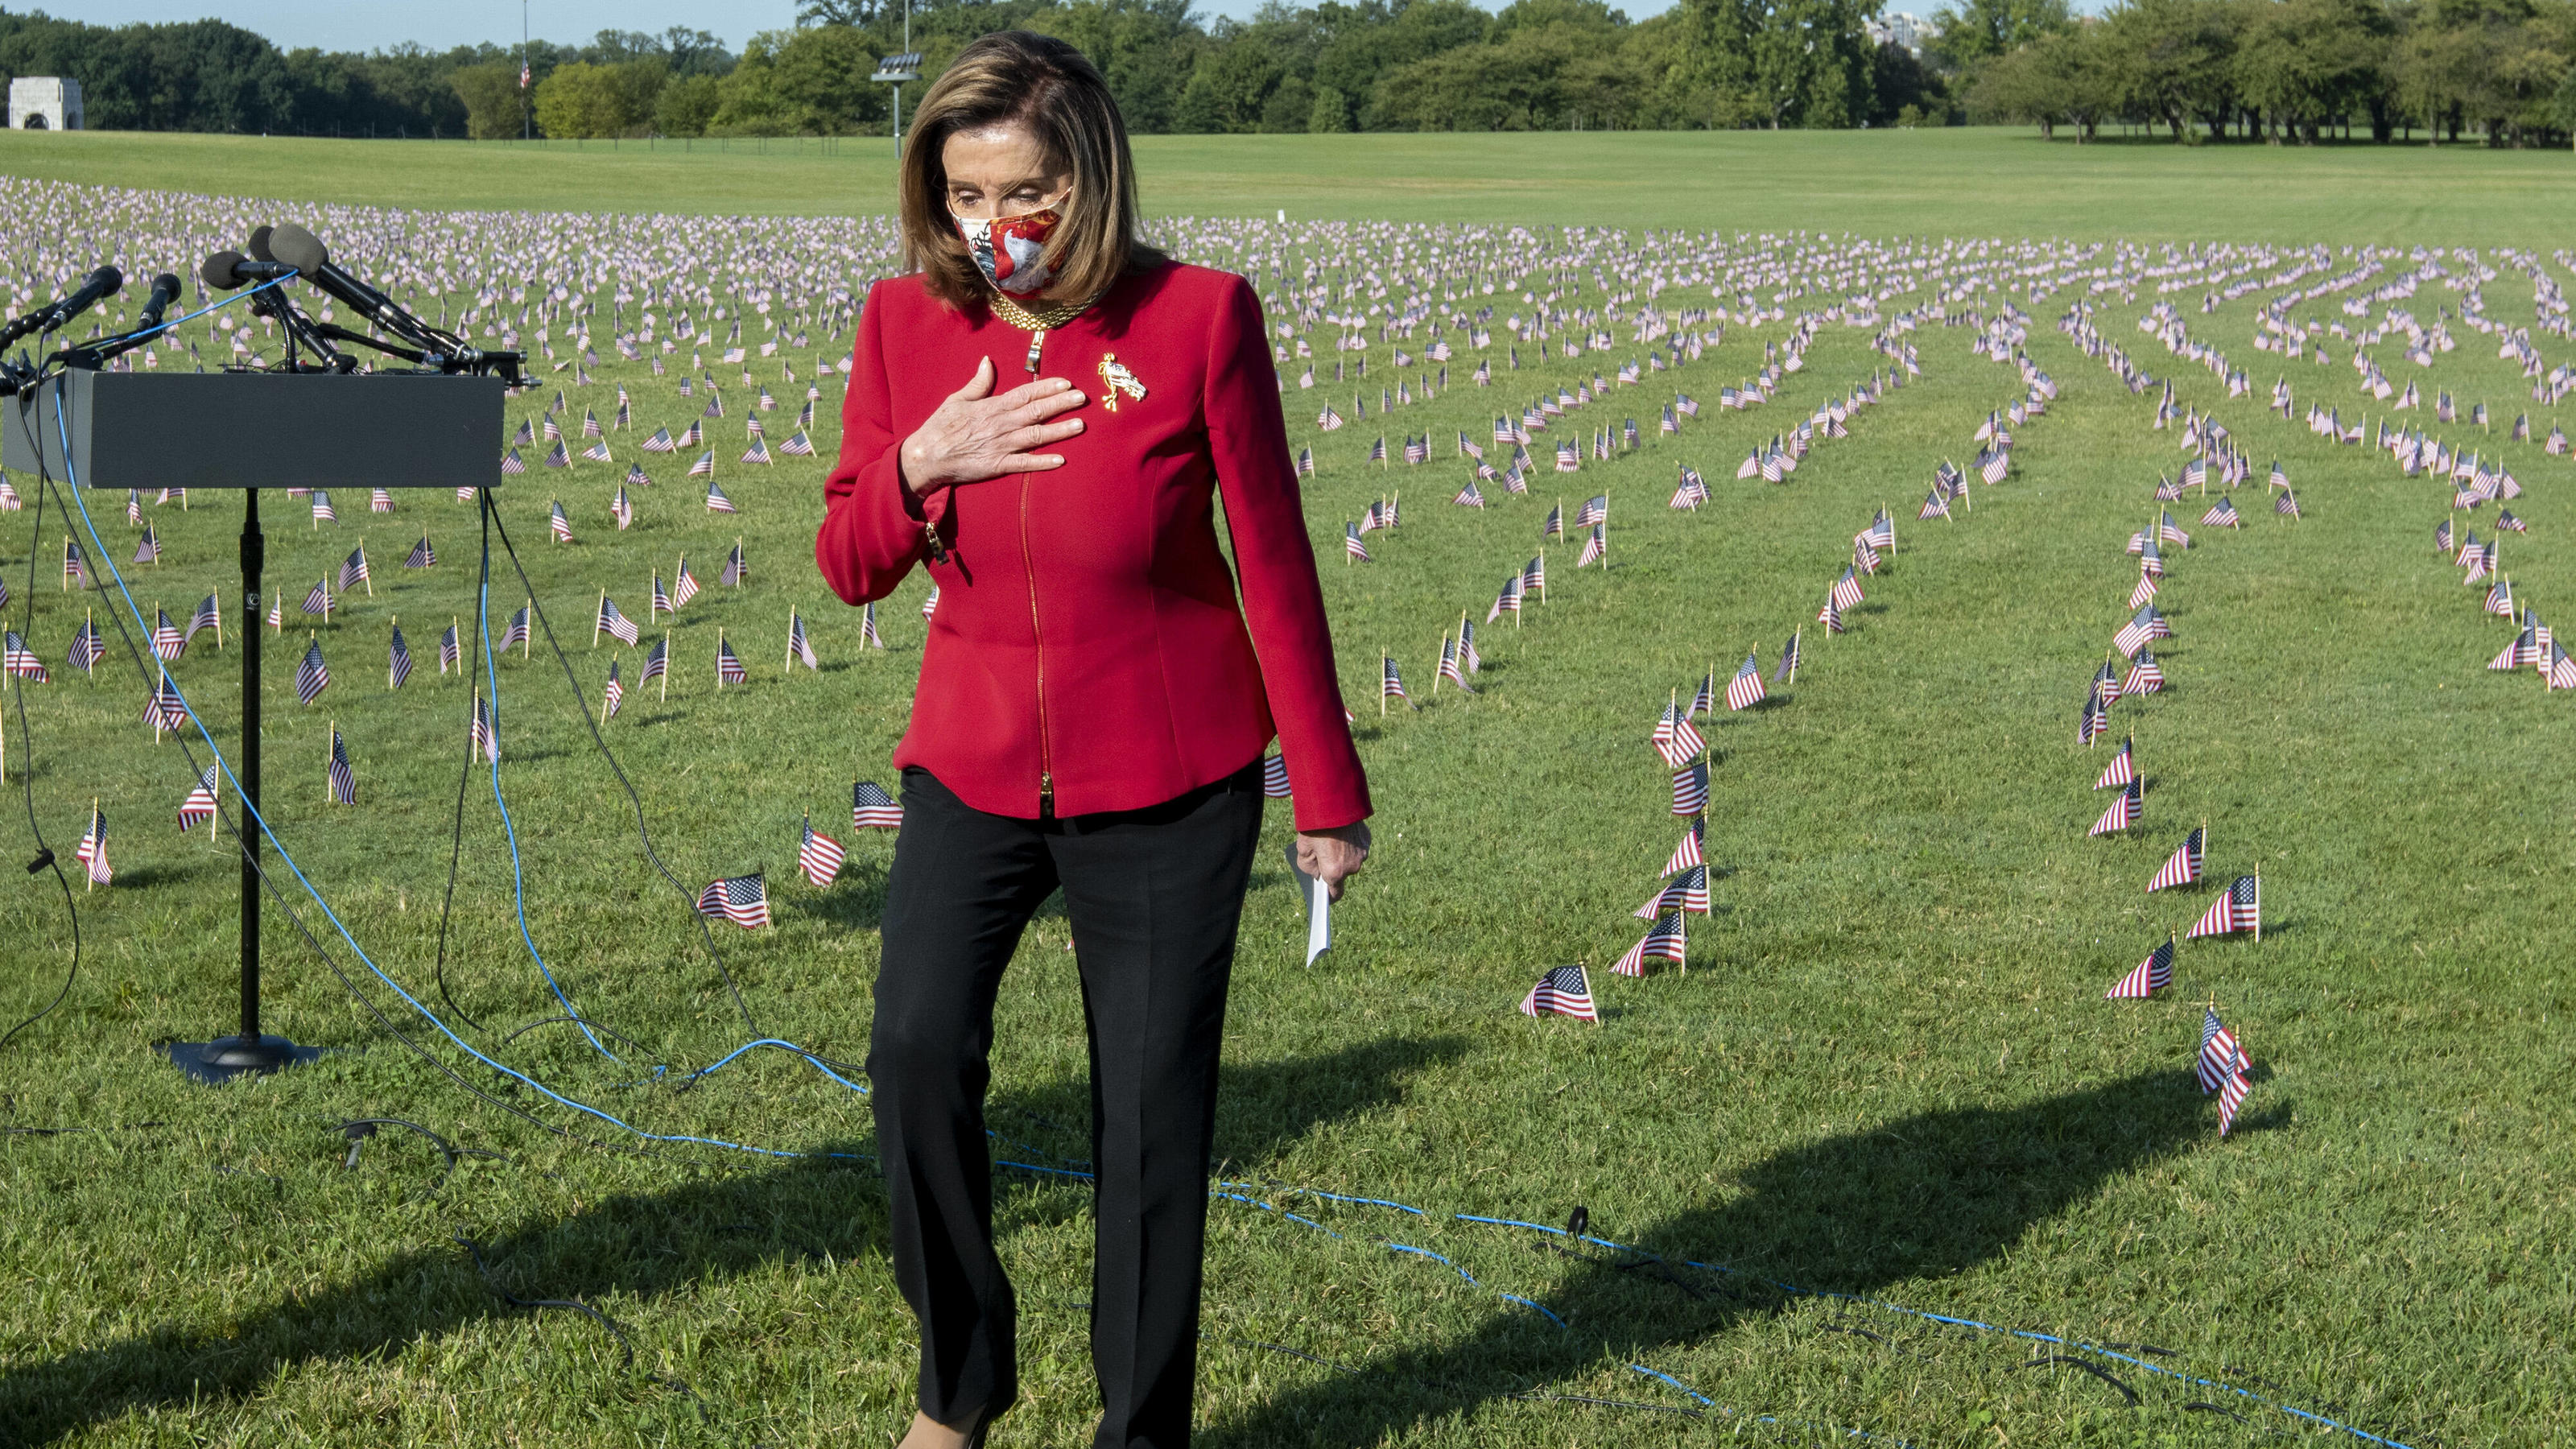  House Speaker Nancy Pelosi takes part during an event commemorating the 200,000 Americans that have lost their lives due to the Covid-19 pandemic, on the National Mall in Washington, DC on Tuesday, September 22, 2020. Some 20,000 American flags were